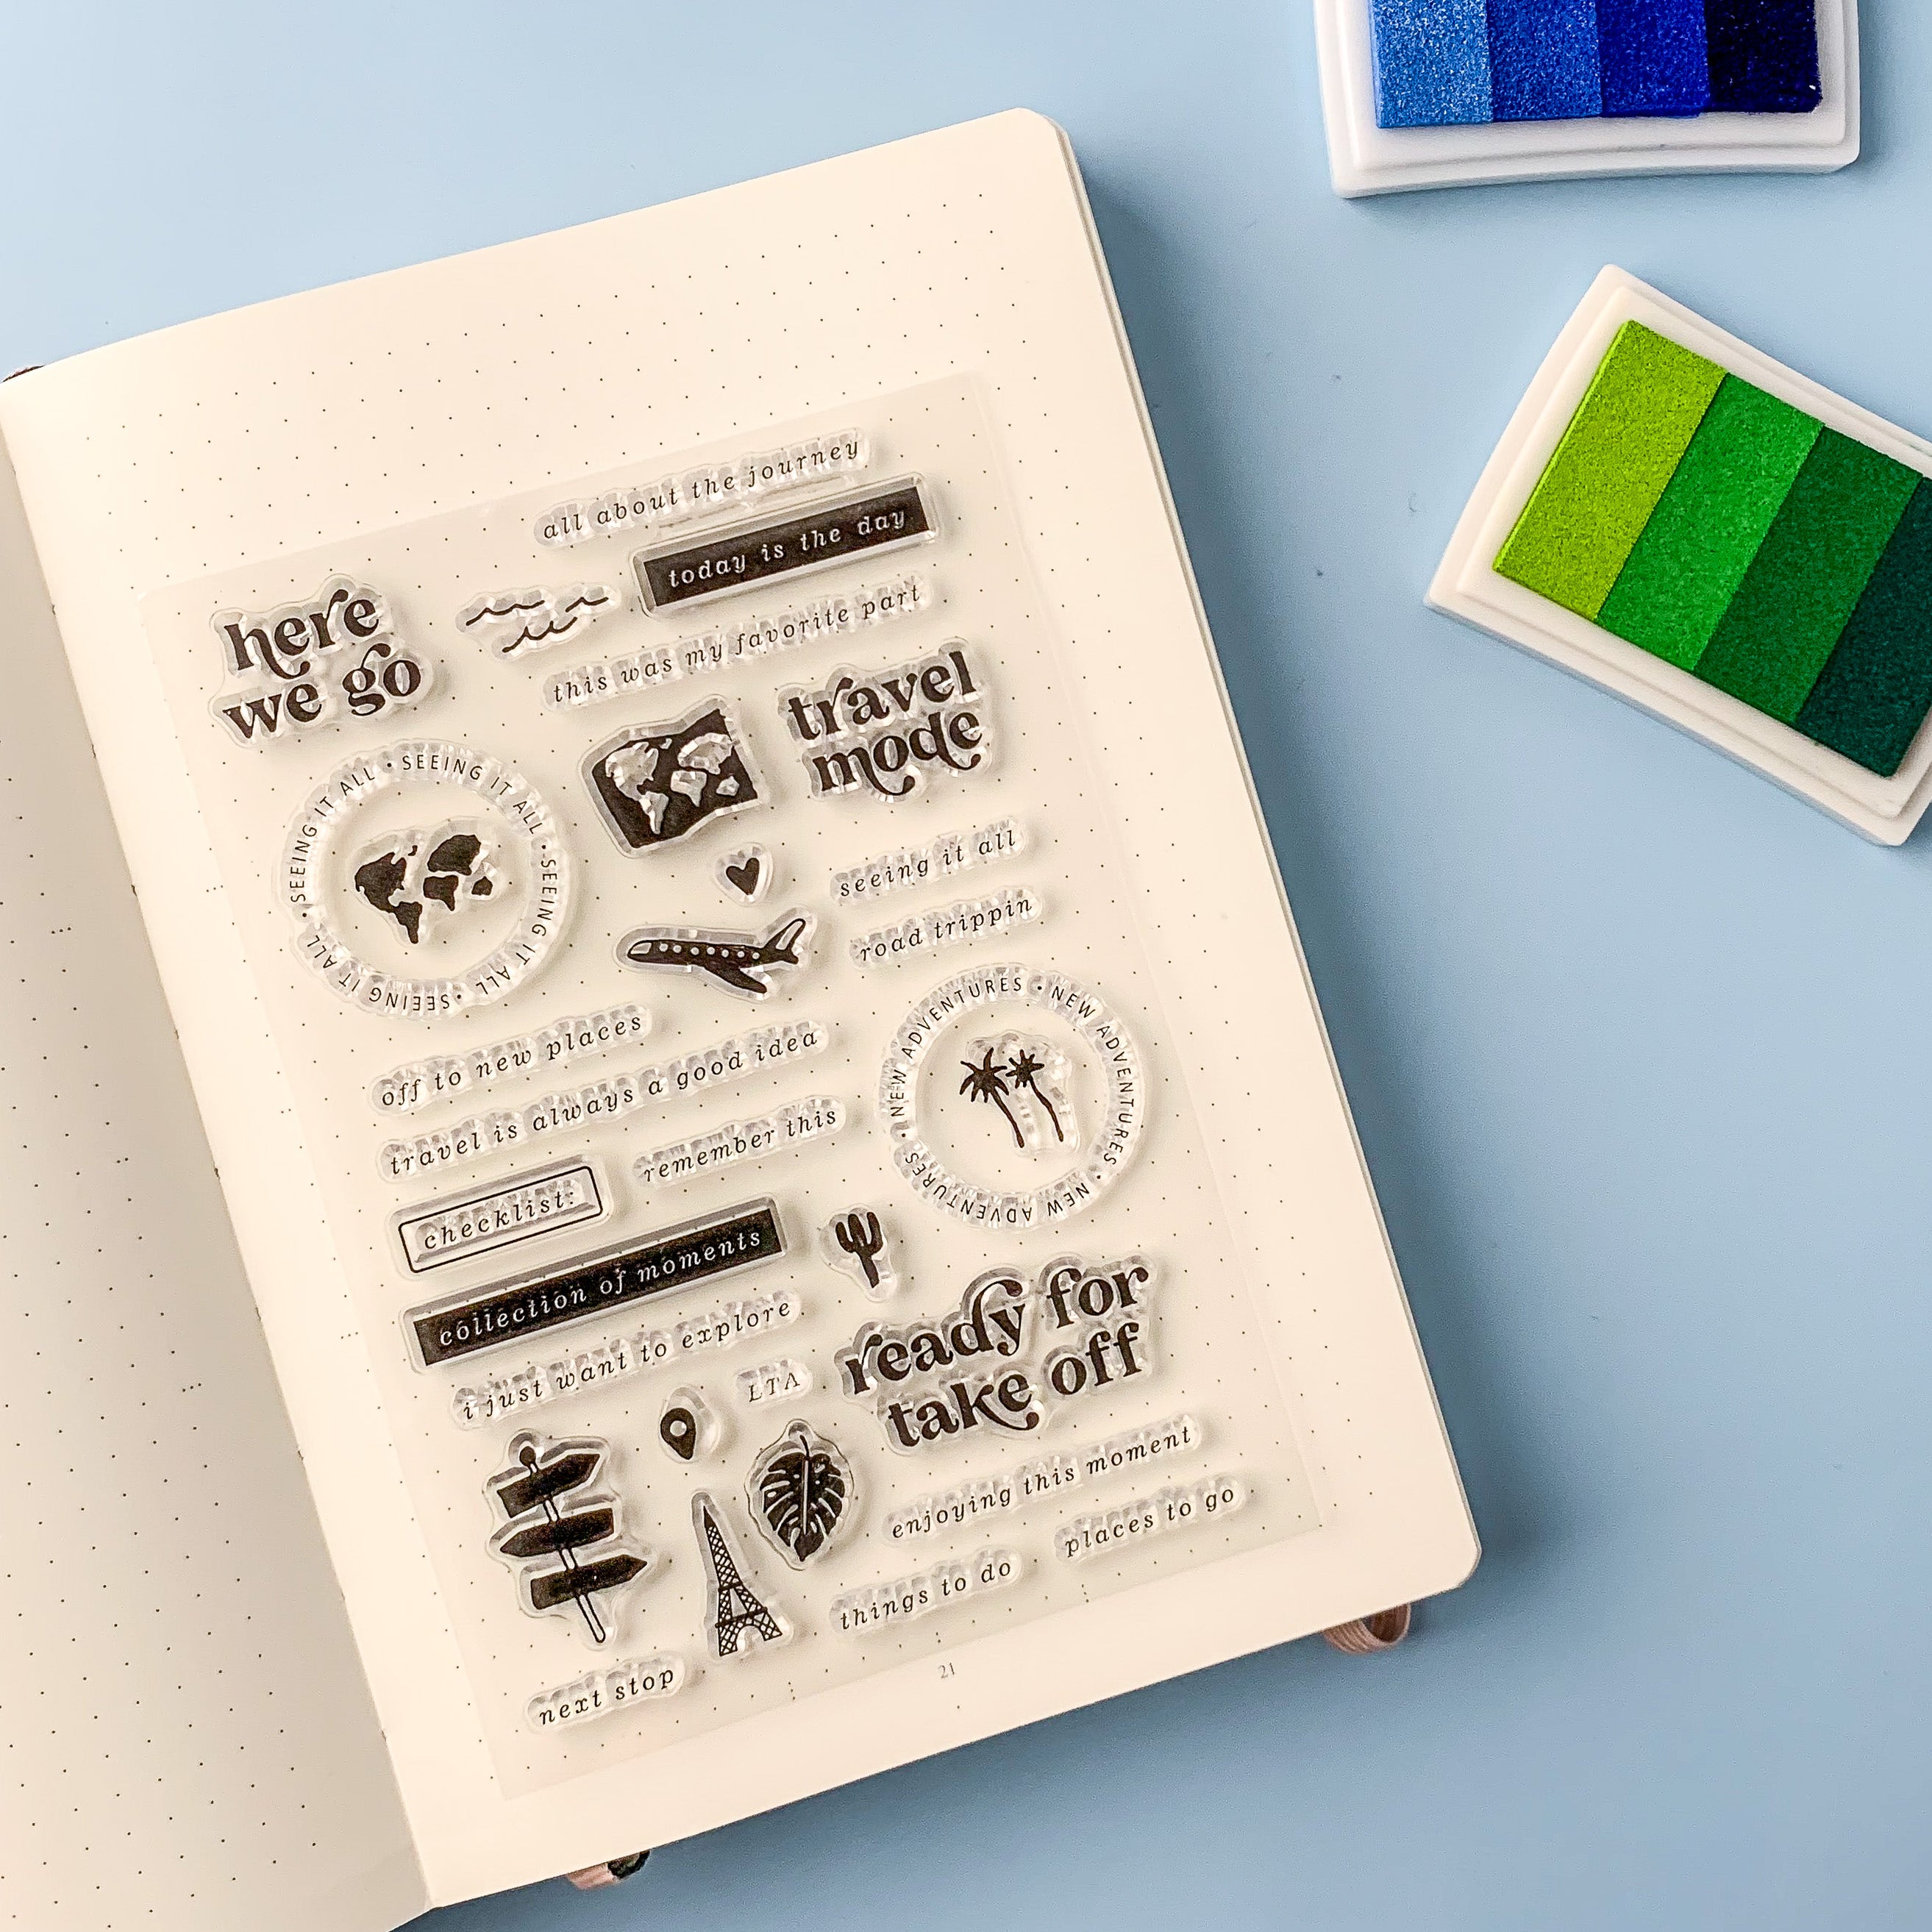  "Here We Go" Travel Journal Stamps: Capture your adventures with these charming travel-themed stamps. Featuring whimsical illustrations of suitcases, planes, and maps, these stamps are perfect for adding a touch of wanderlust to your travel journal. Whether you're documenting a road trip or a globe-trotting adventure, these stamps are a fun and creative way to preserve your memories. These stamps are sold at BBB Supplies Craft Shop.